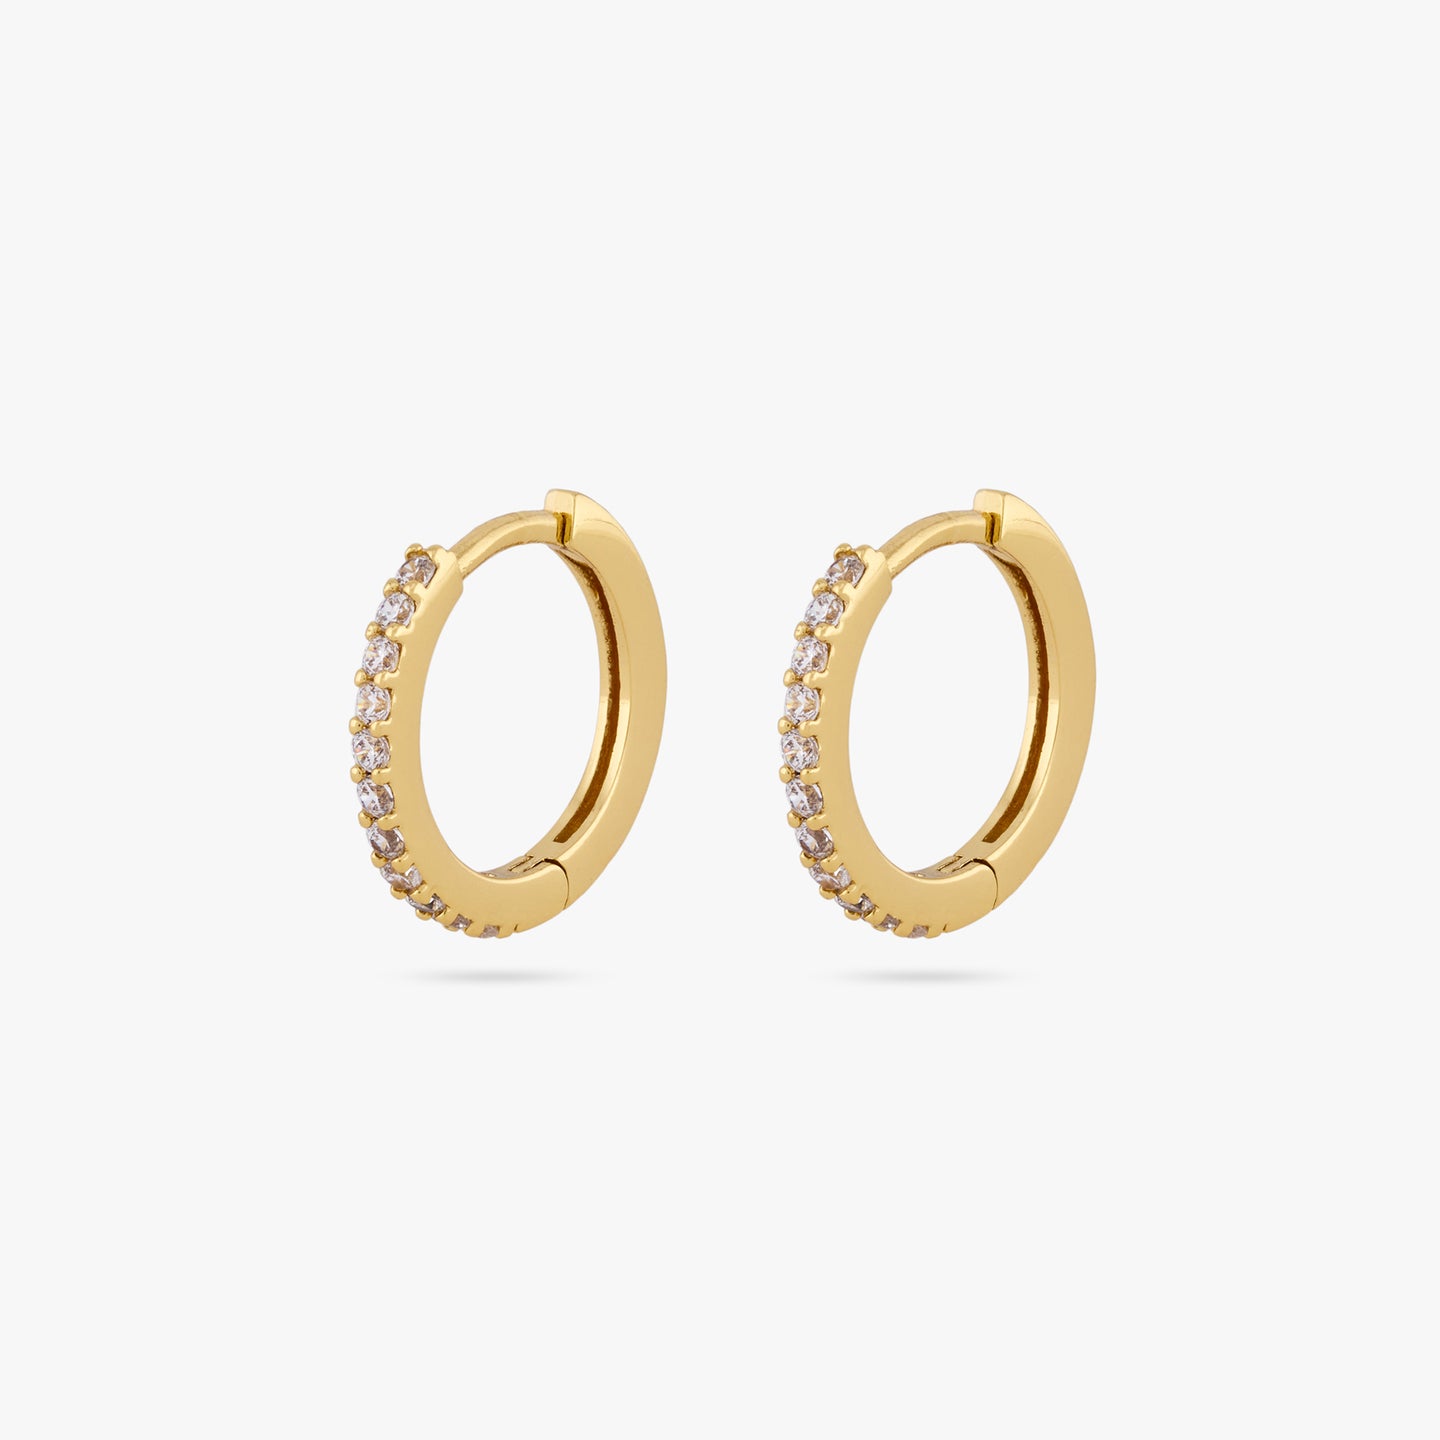 This is a pair of small gold huggies measuring 13mm that features clear cz gems along the front [pair] color:null|gold/clear